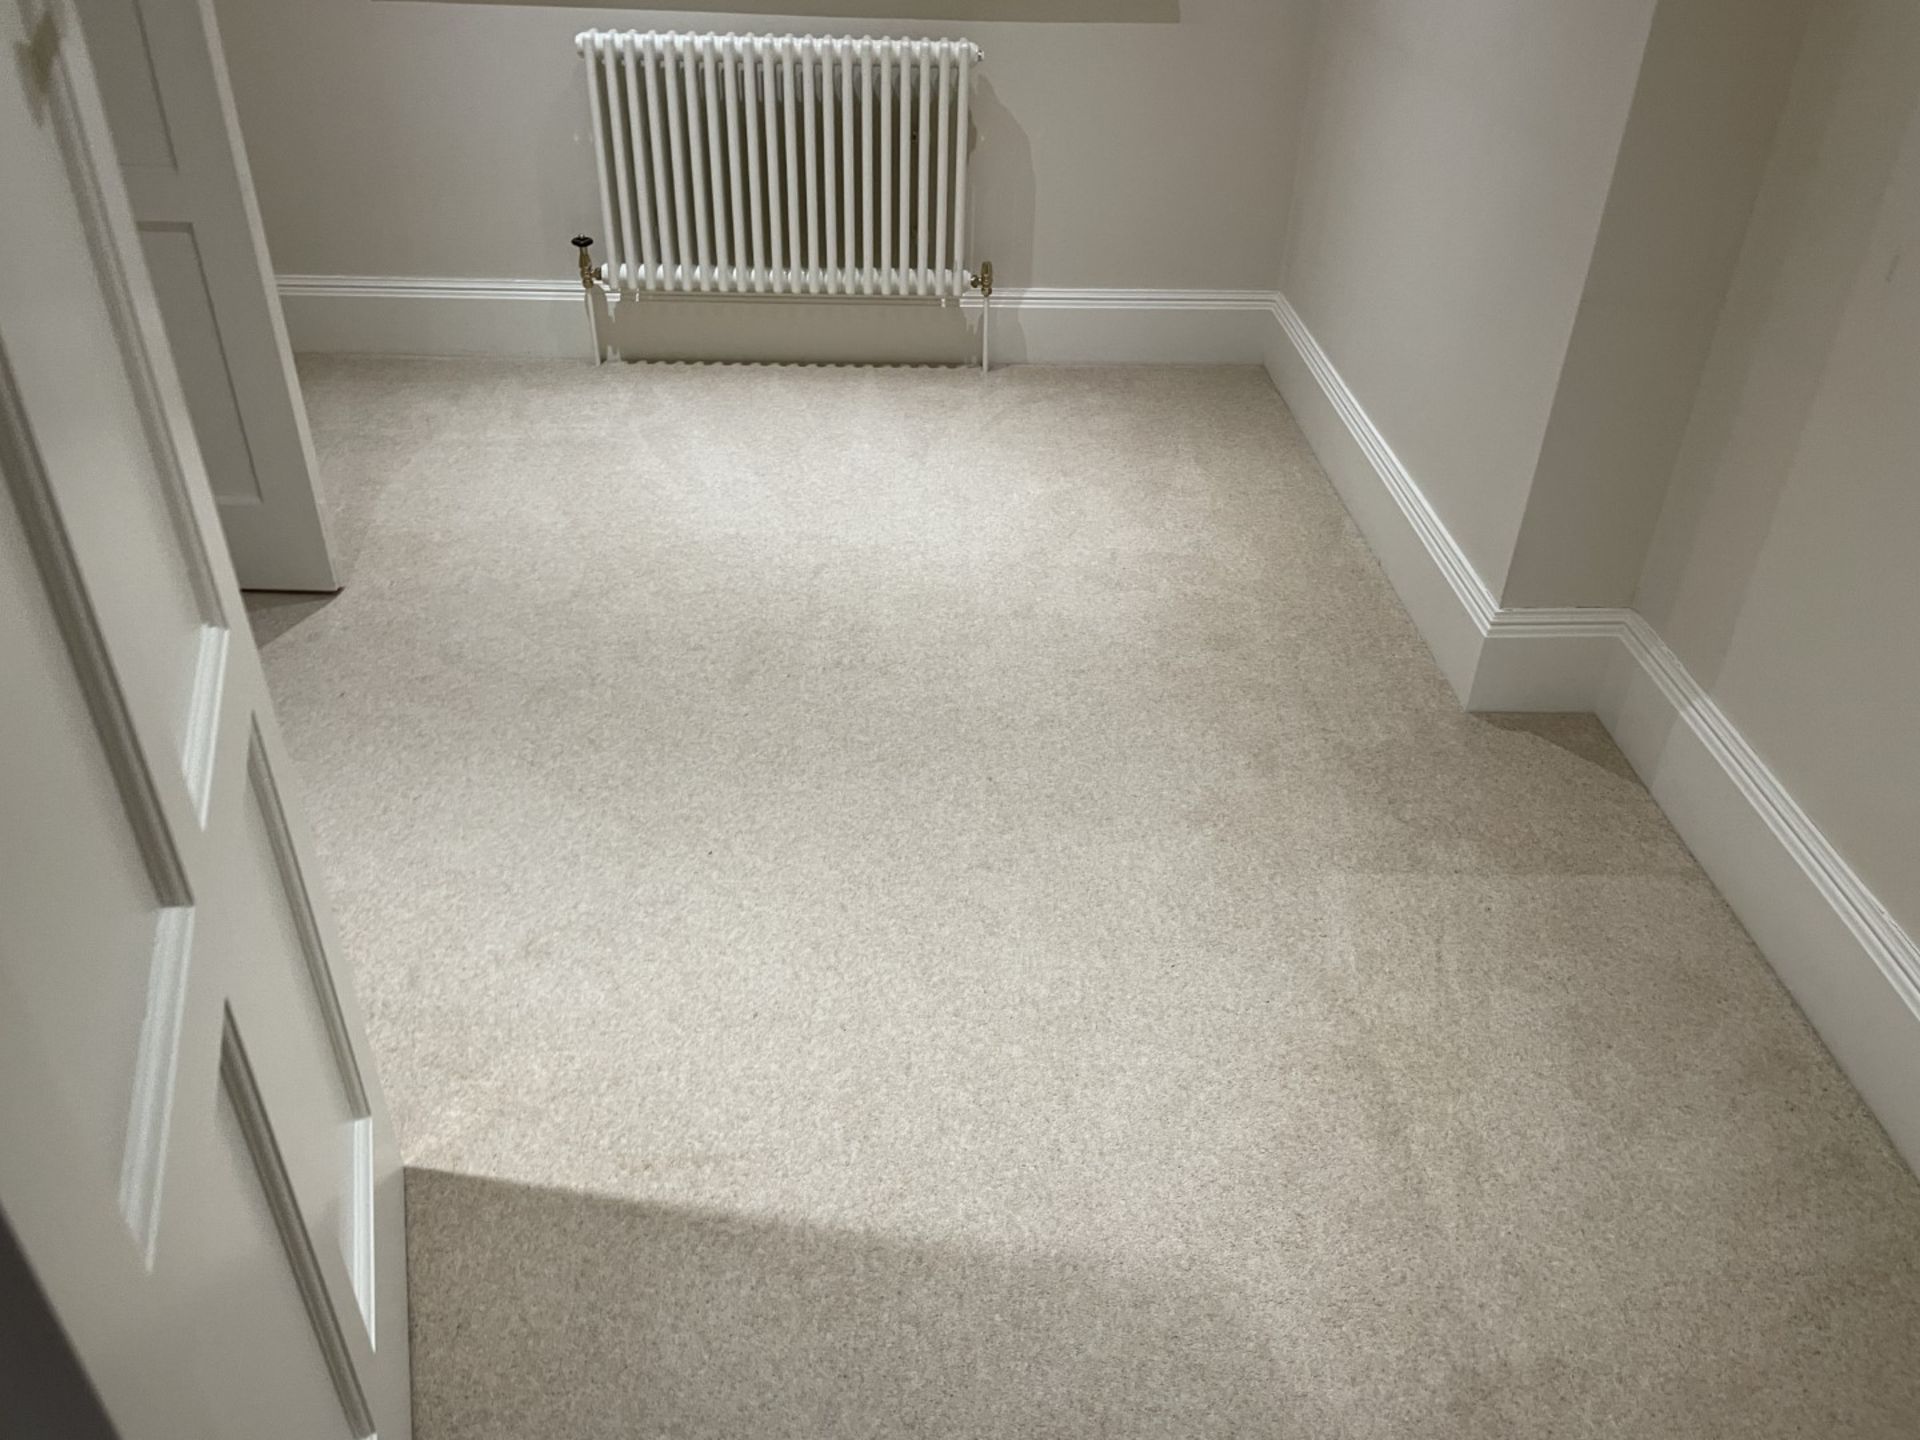 1 x Luxury Wool Bedroom + Dressing Room Carpets in a Neutral Tone with Premium Underlay